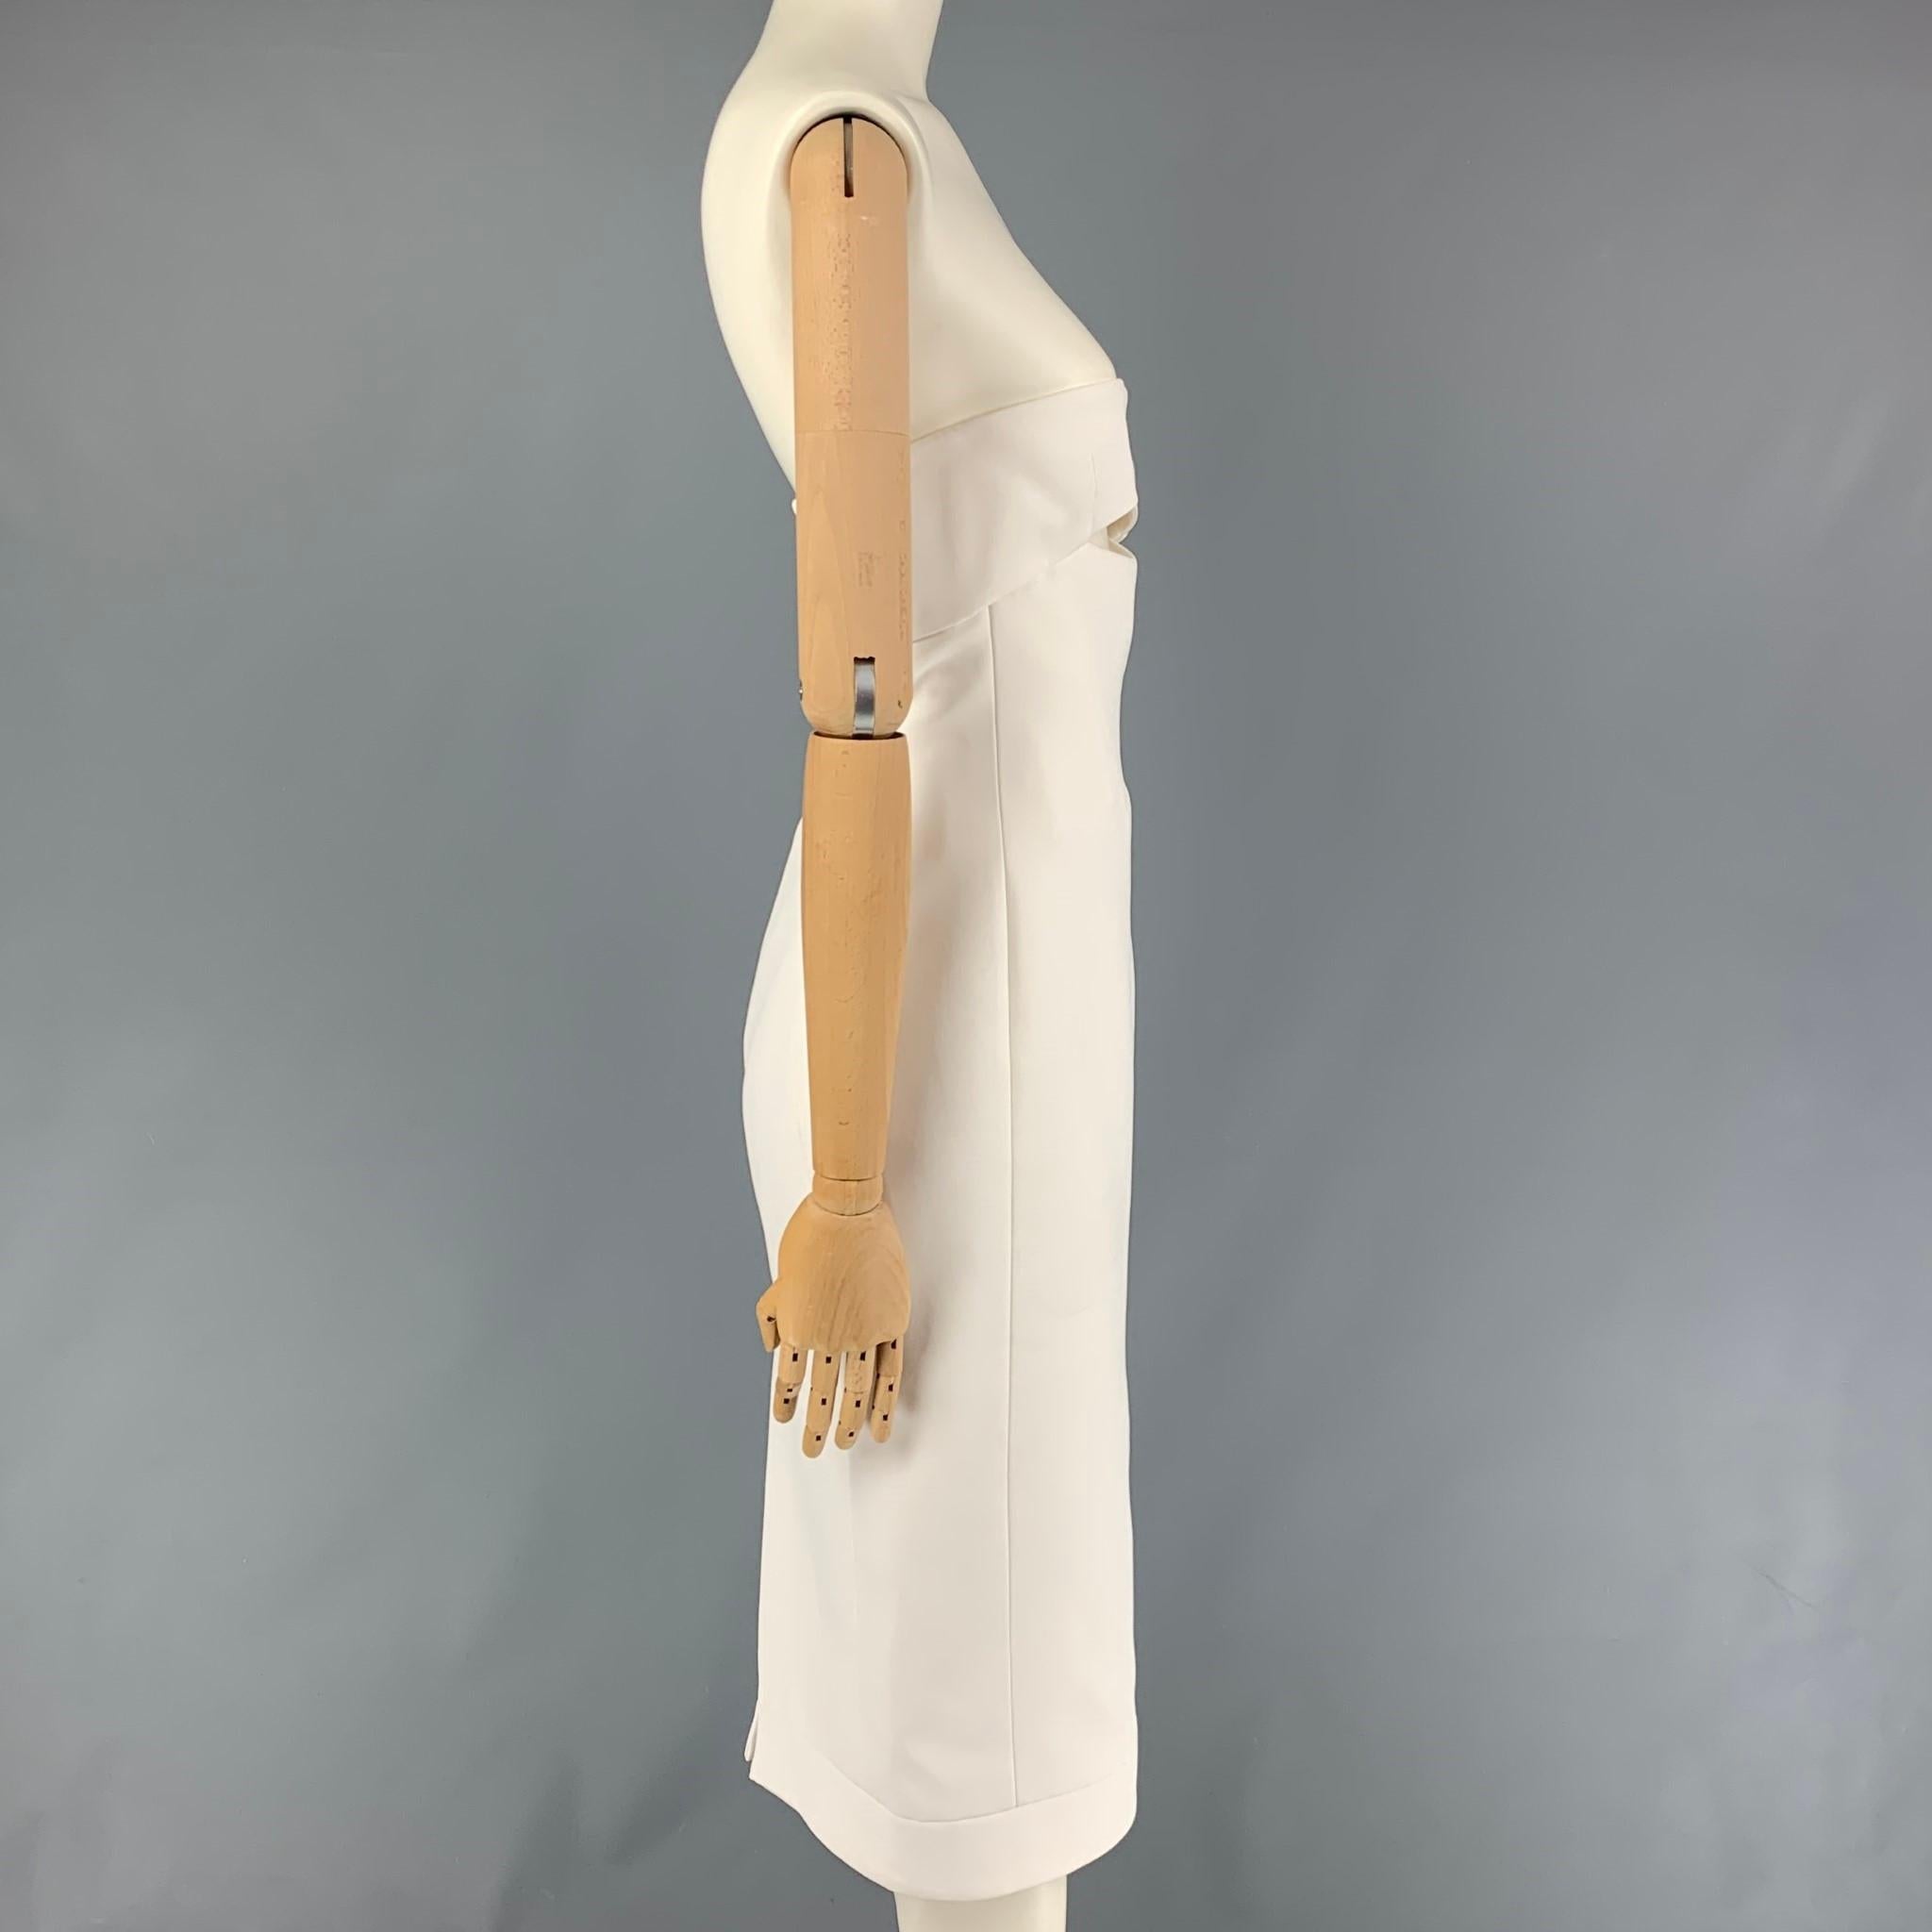 SAINT LAURENT cocktail dress comes in a white viscose featuring a cutout front, strapless neckline, vented back, midi length, and a back zip up closure. Made in Italy. 

Very Good Pre-Owned Condition.
Marked: F 36
Original Retail Price: